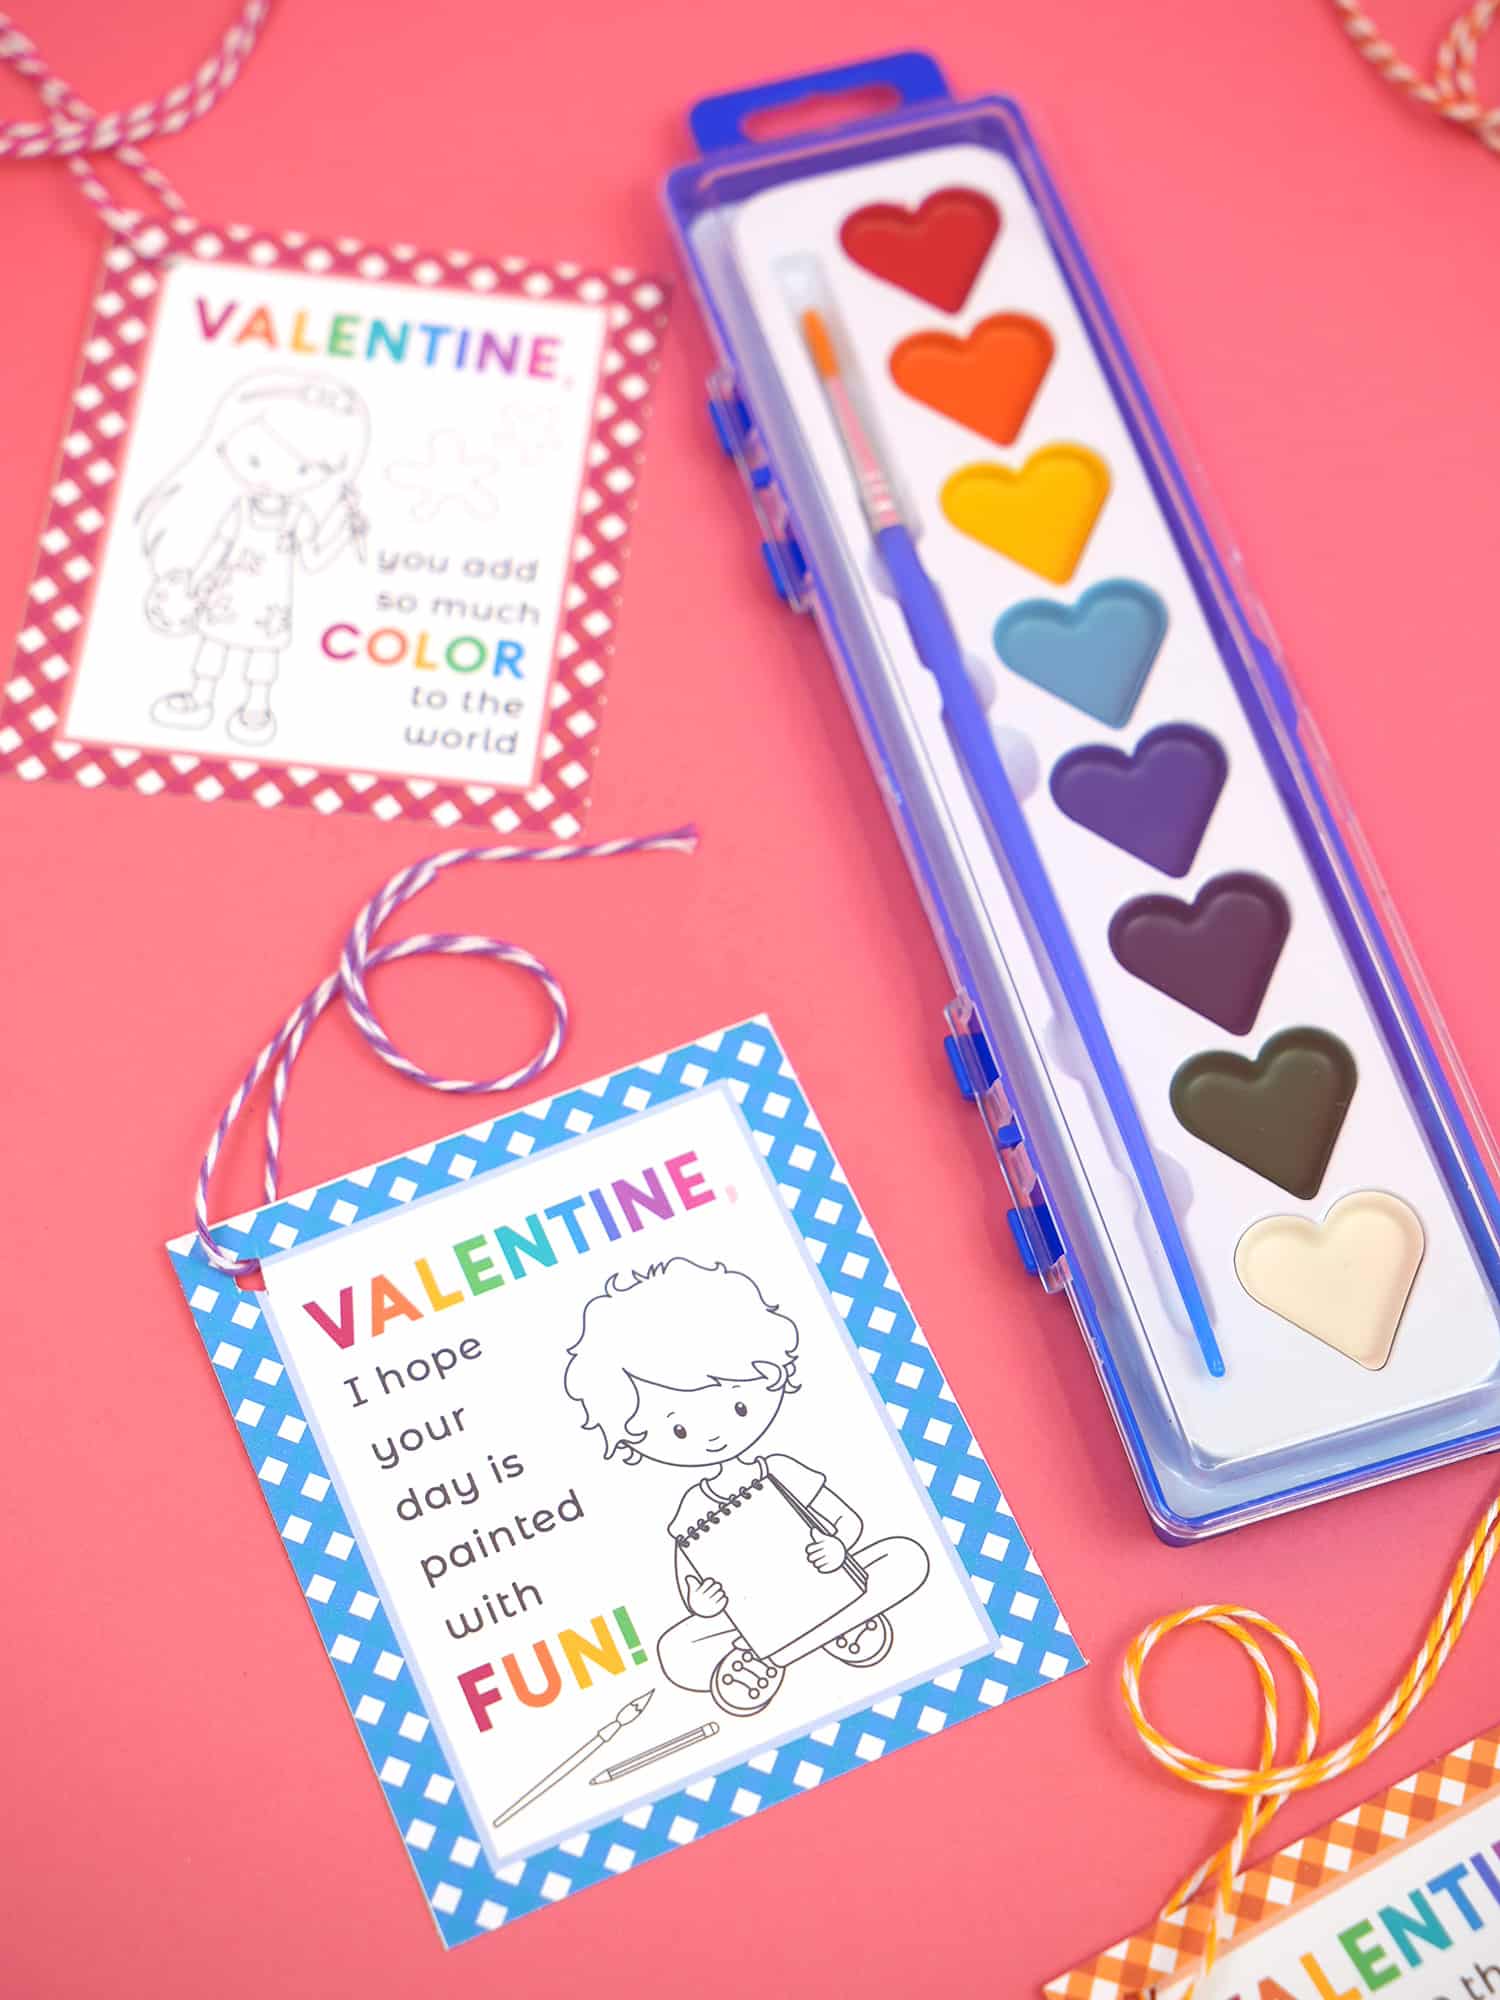 "Valentine, I hope your day is painted with fun!" paint themed Valentine's Day card on pink background with heart watercolor paint set